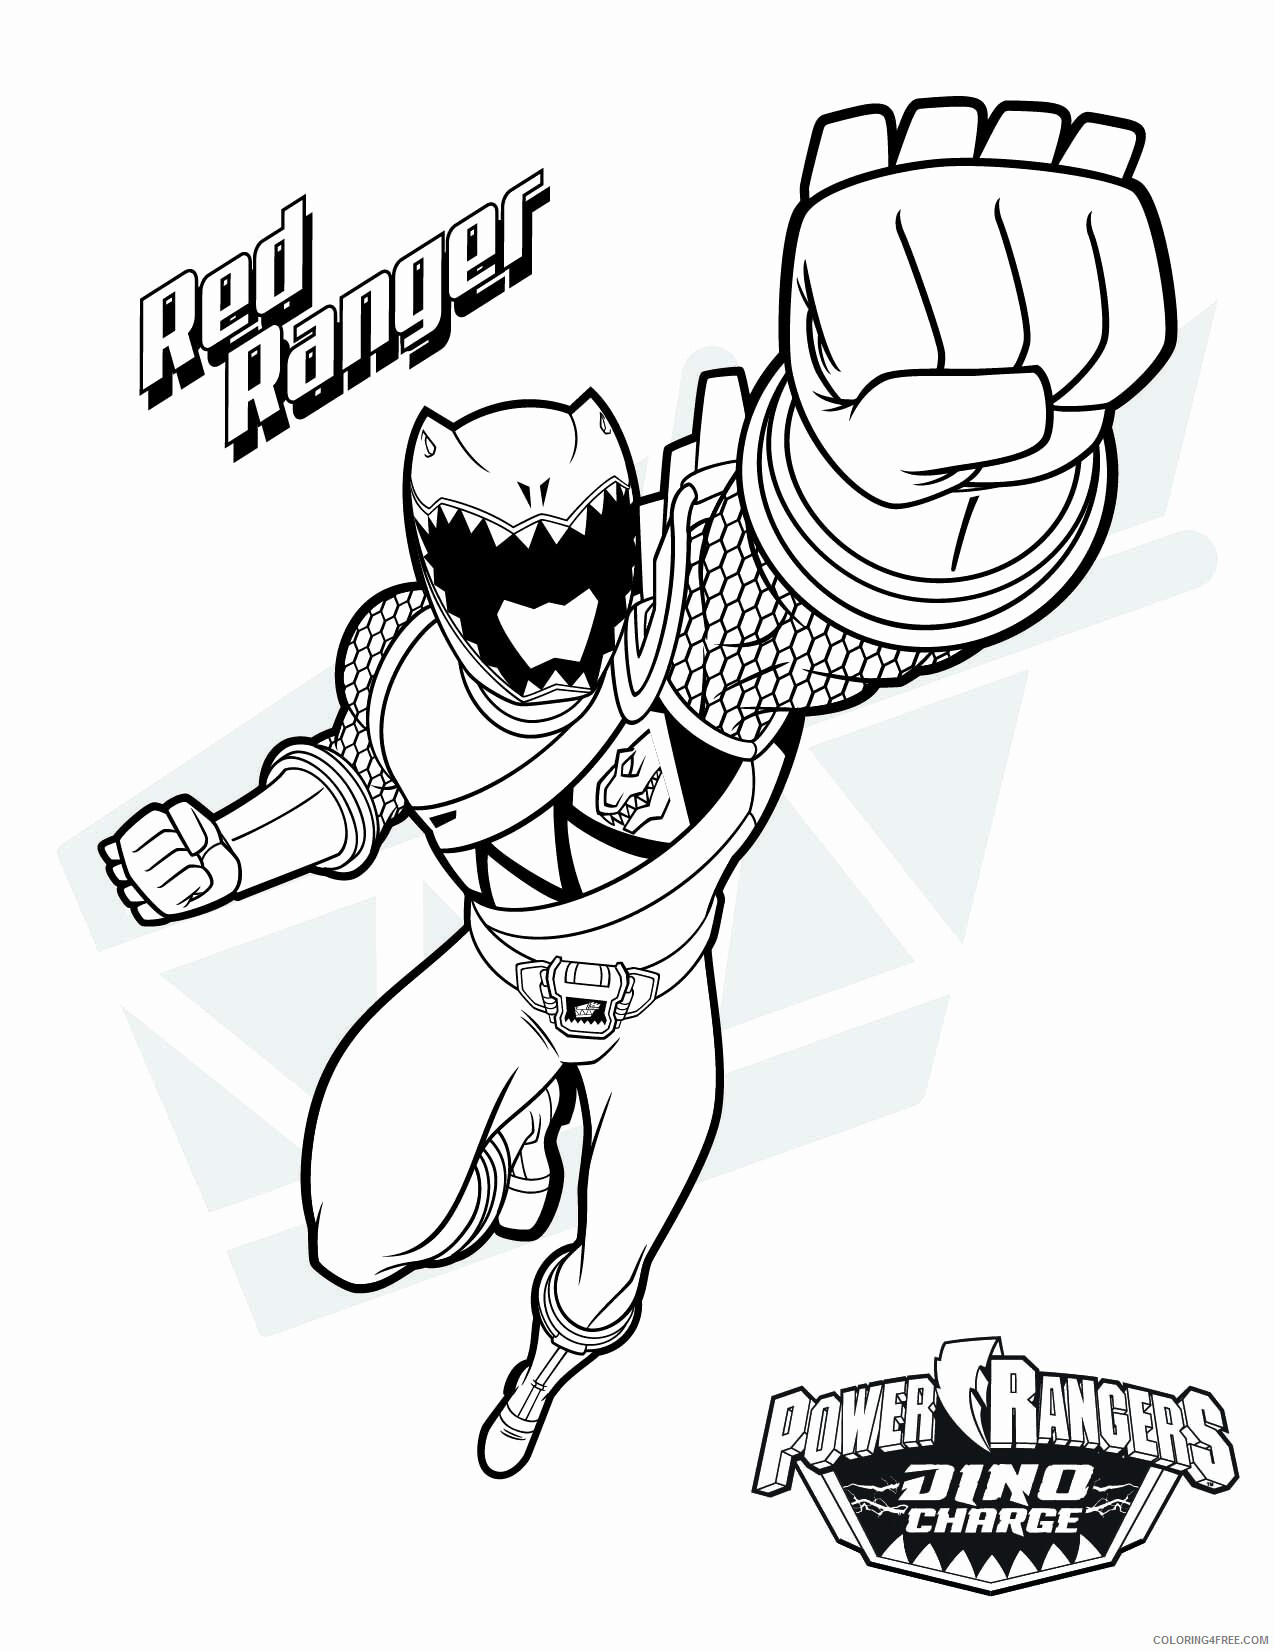 Power Rangers Coloring Pages TV Film mighty morphin Printable 2020 06671  Coloring4free - Coloring4Free.com